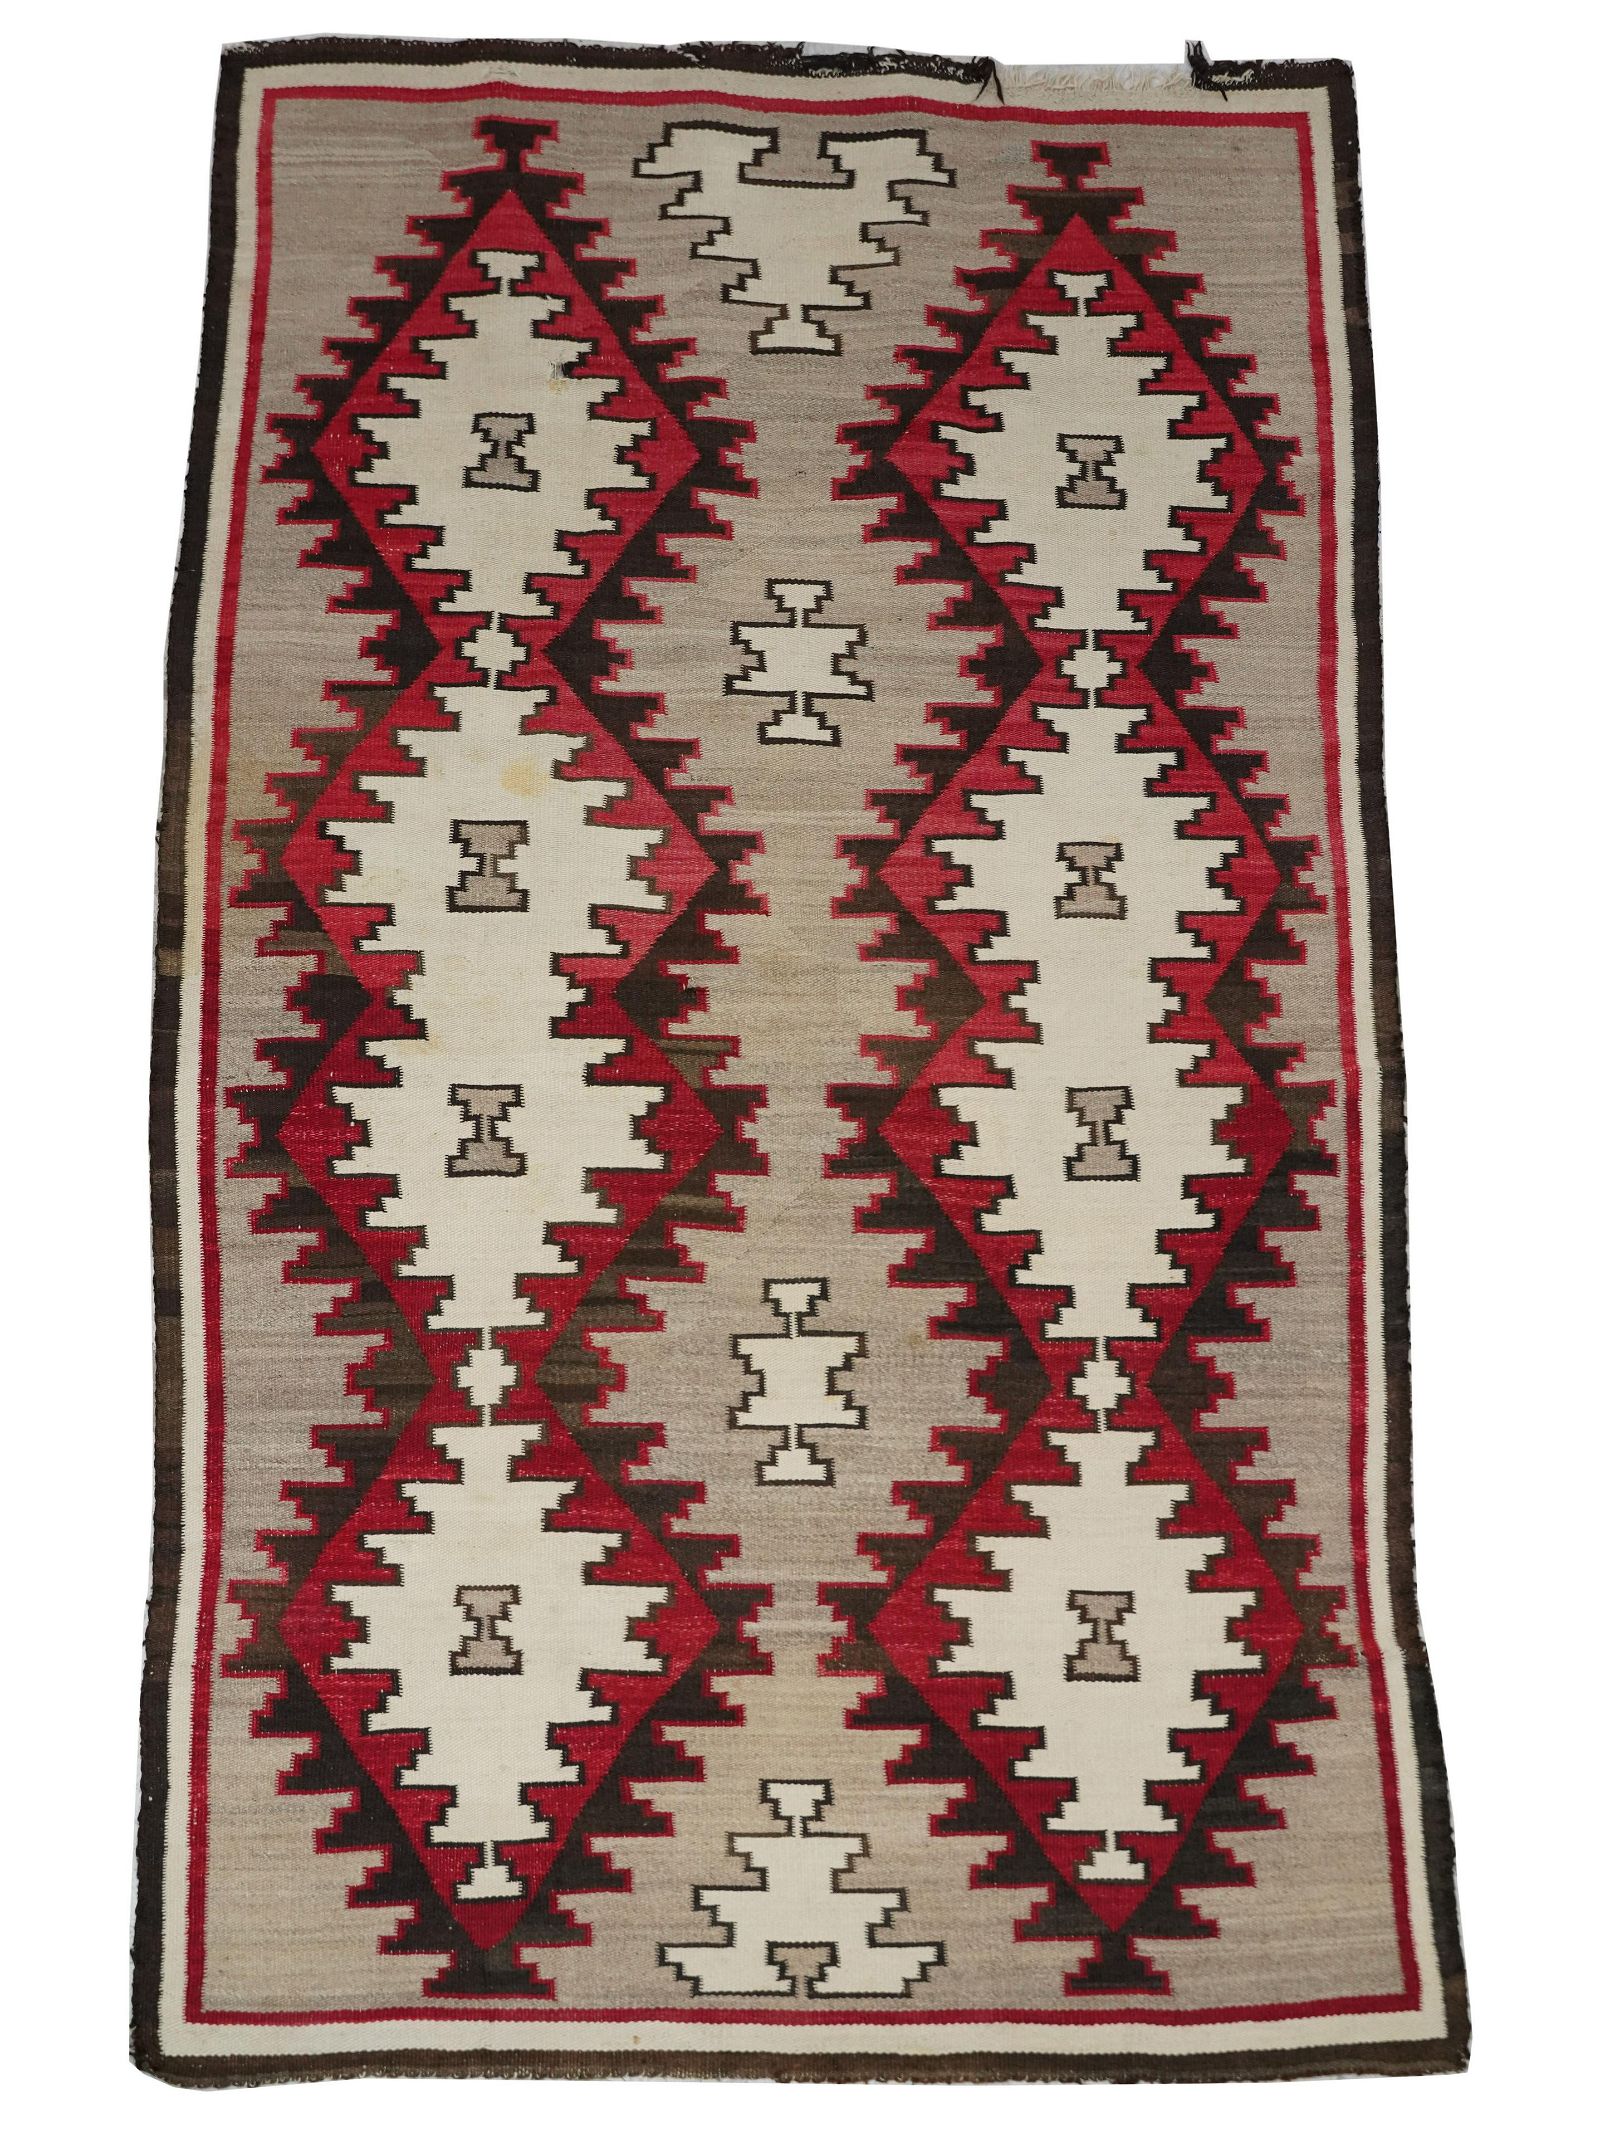 NAVAJO BLANKETwool; woven in red,